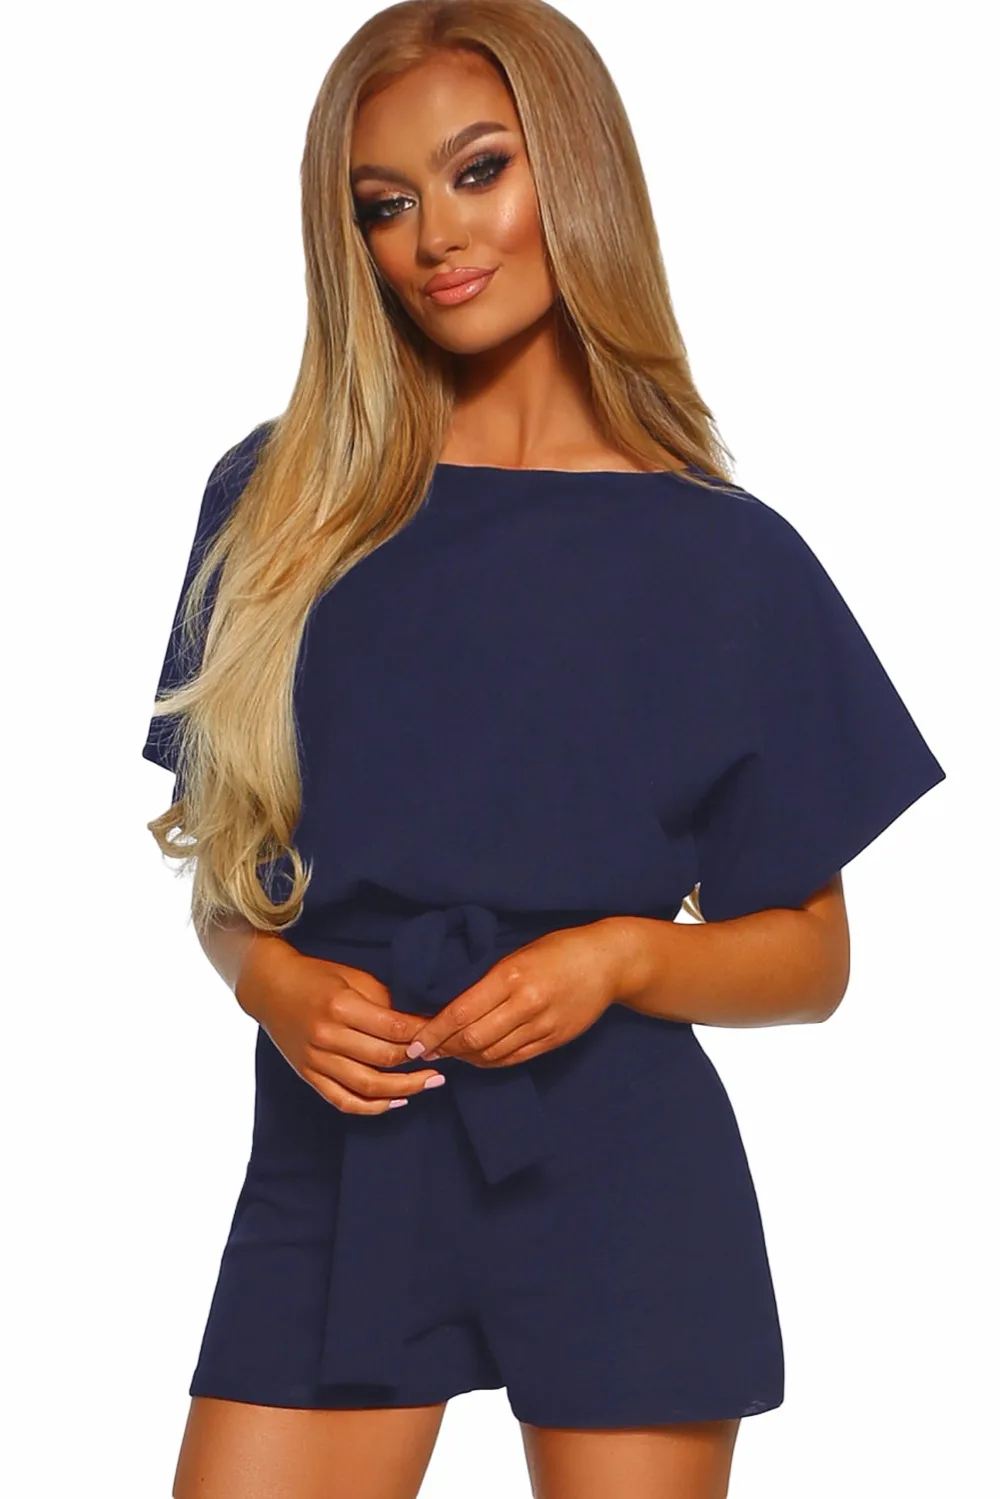 Blue-Over-The-Top-Belted-Playsuit-LC64515-5-1